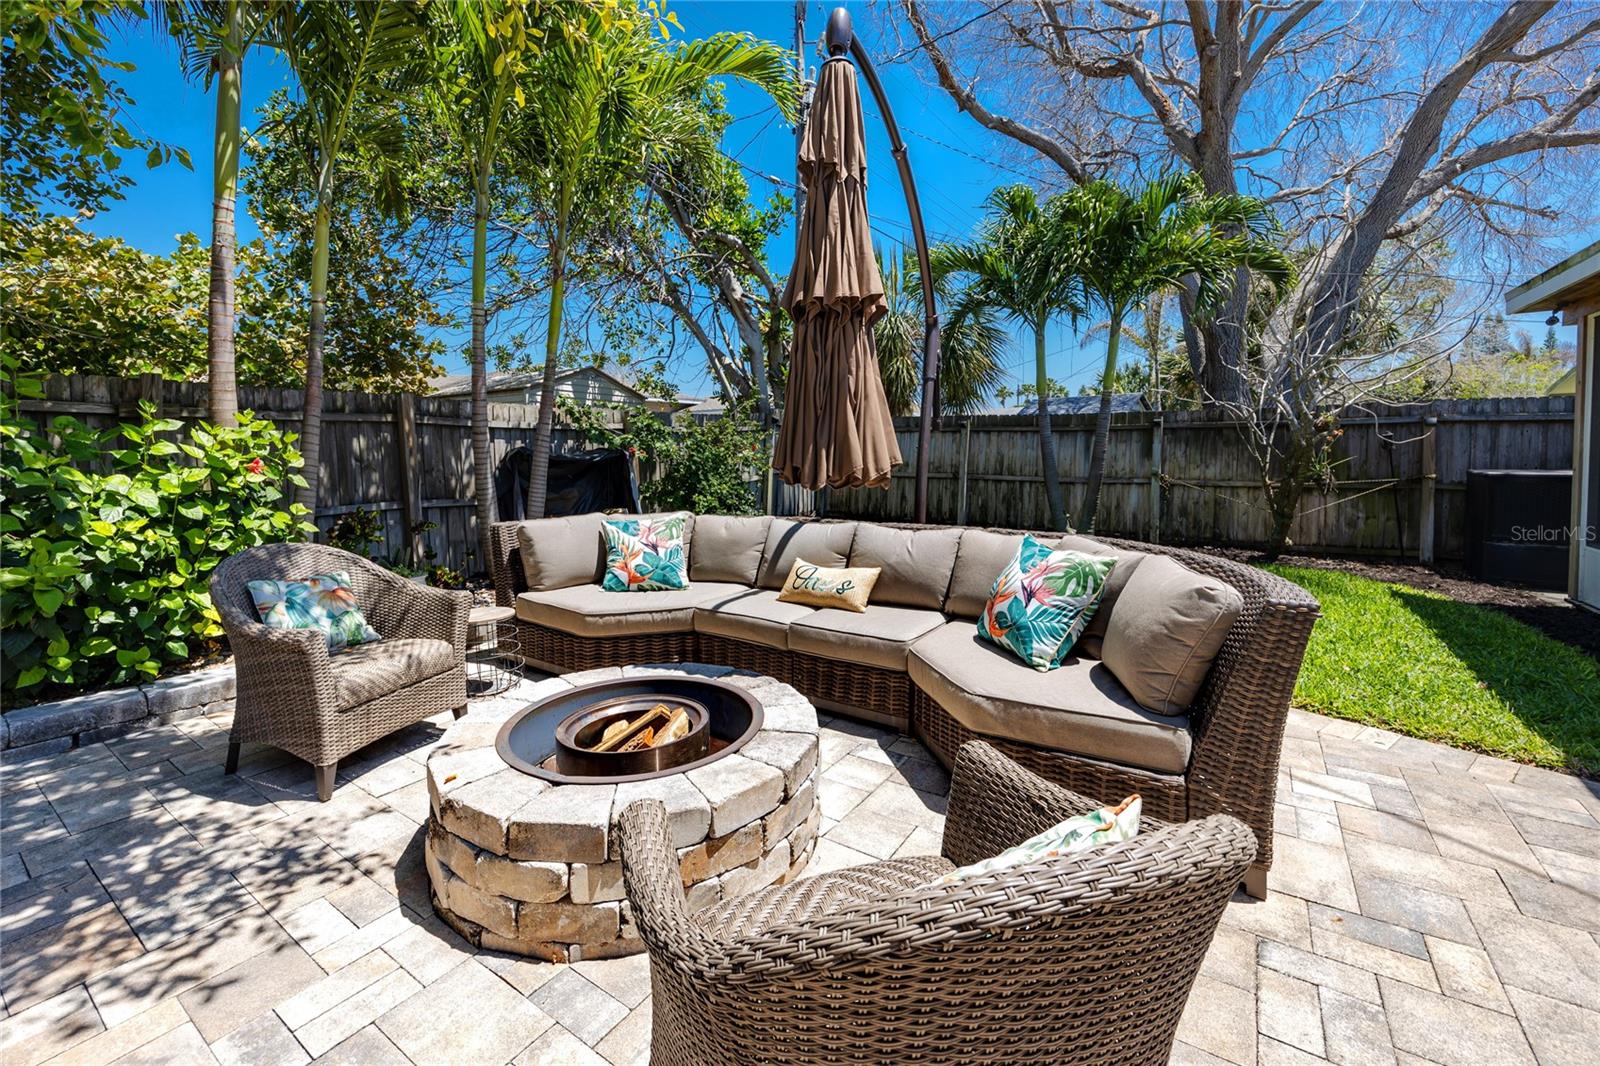 Paver Patio Large Enough For Expansive Outdoor Furniture Seating